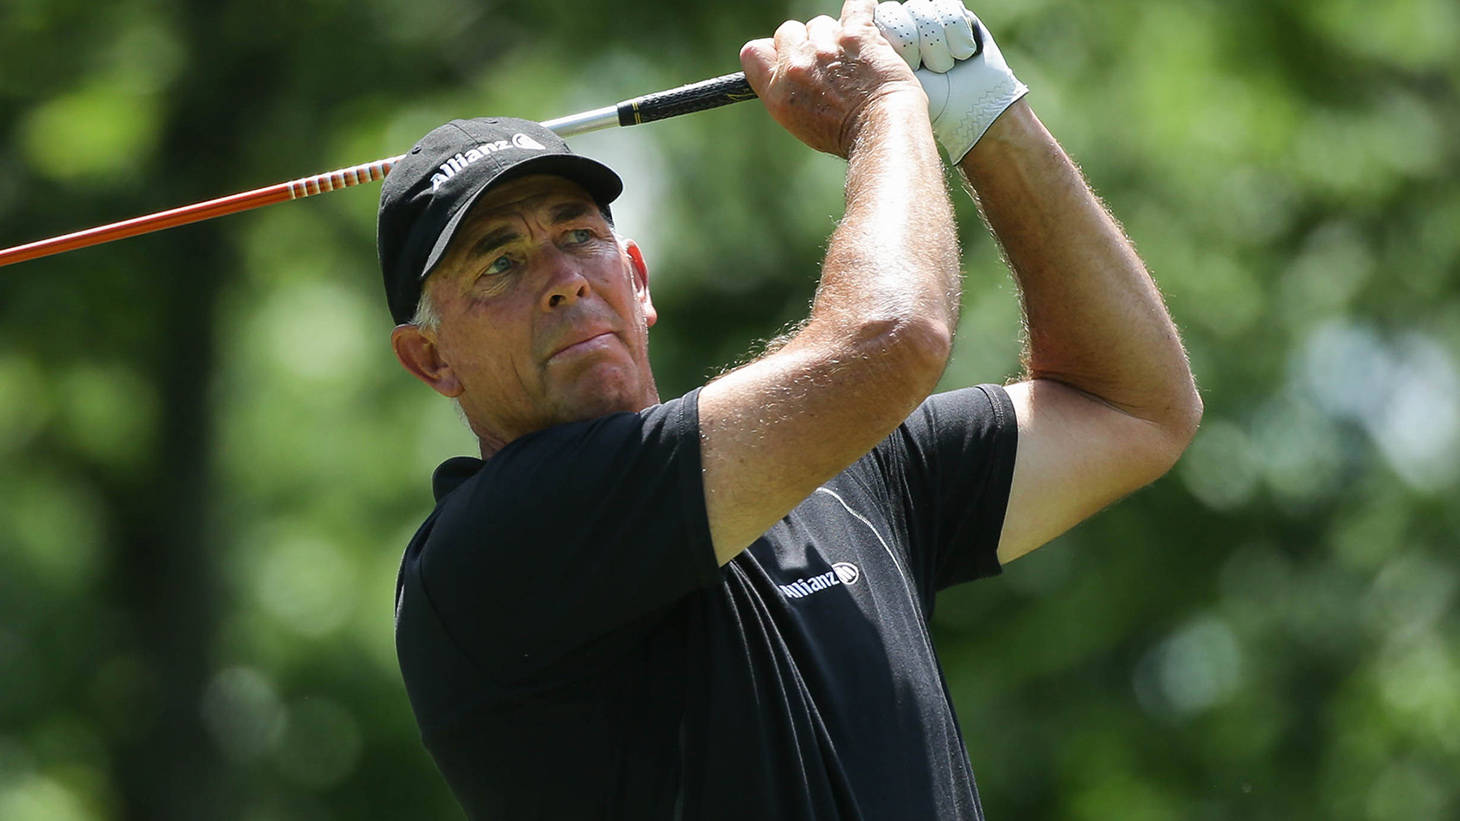 Download Accomplished Golfer Tom Lehman Perfecting His Swing Wallpaper ...